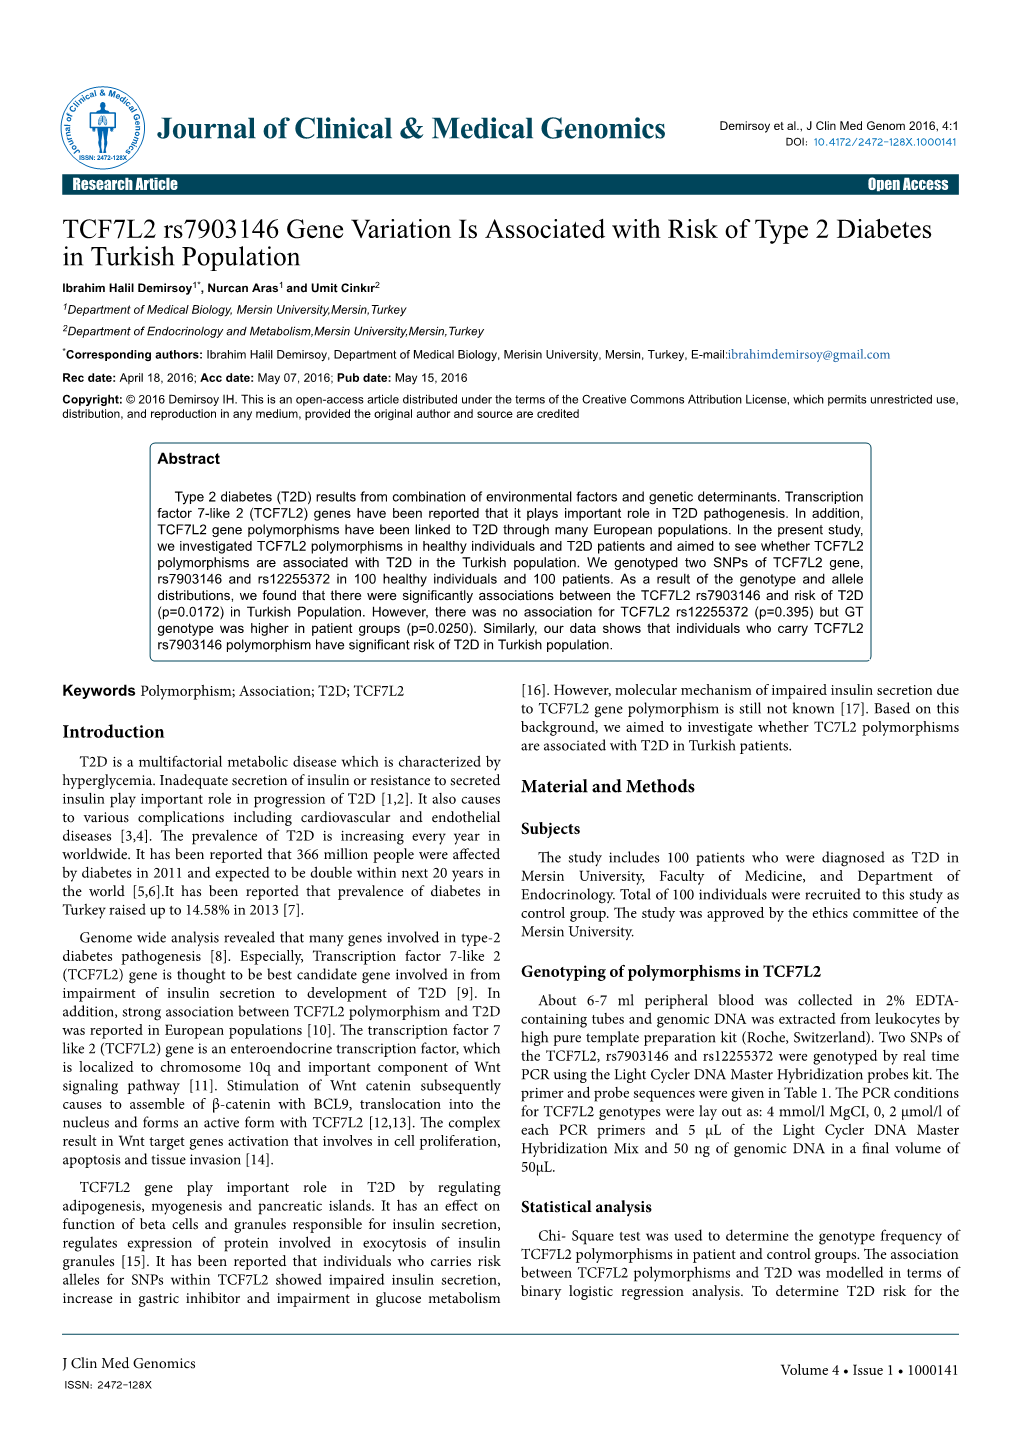 TCF7L2 Rs7903146 Gene Variation Is Associated with Risk of Type 2